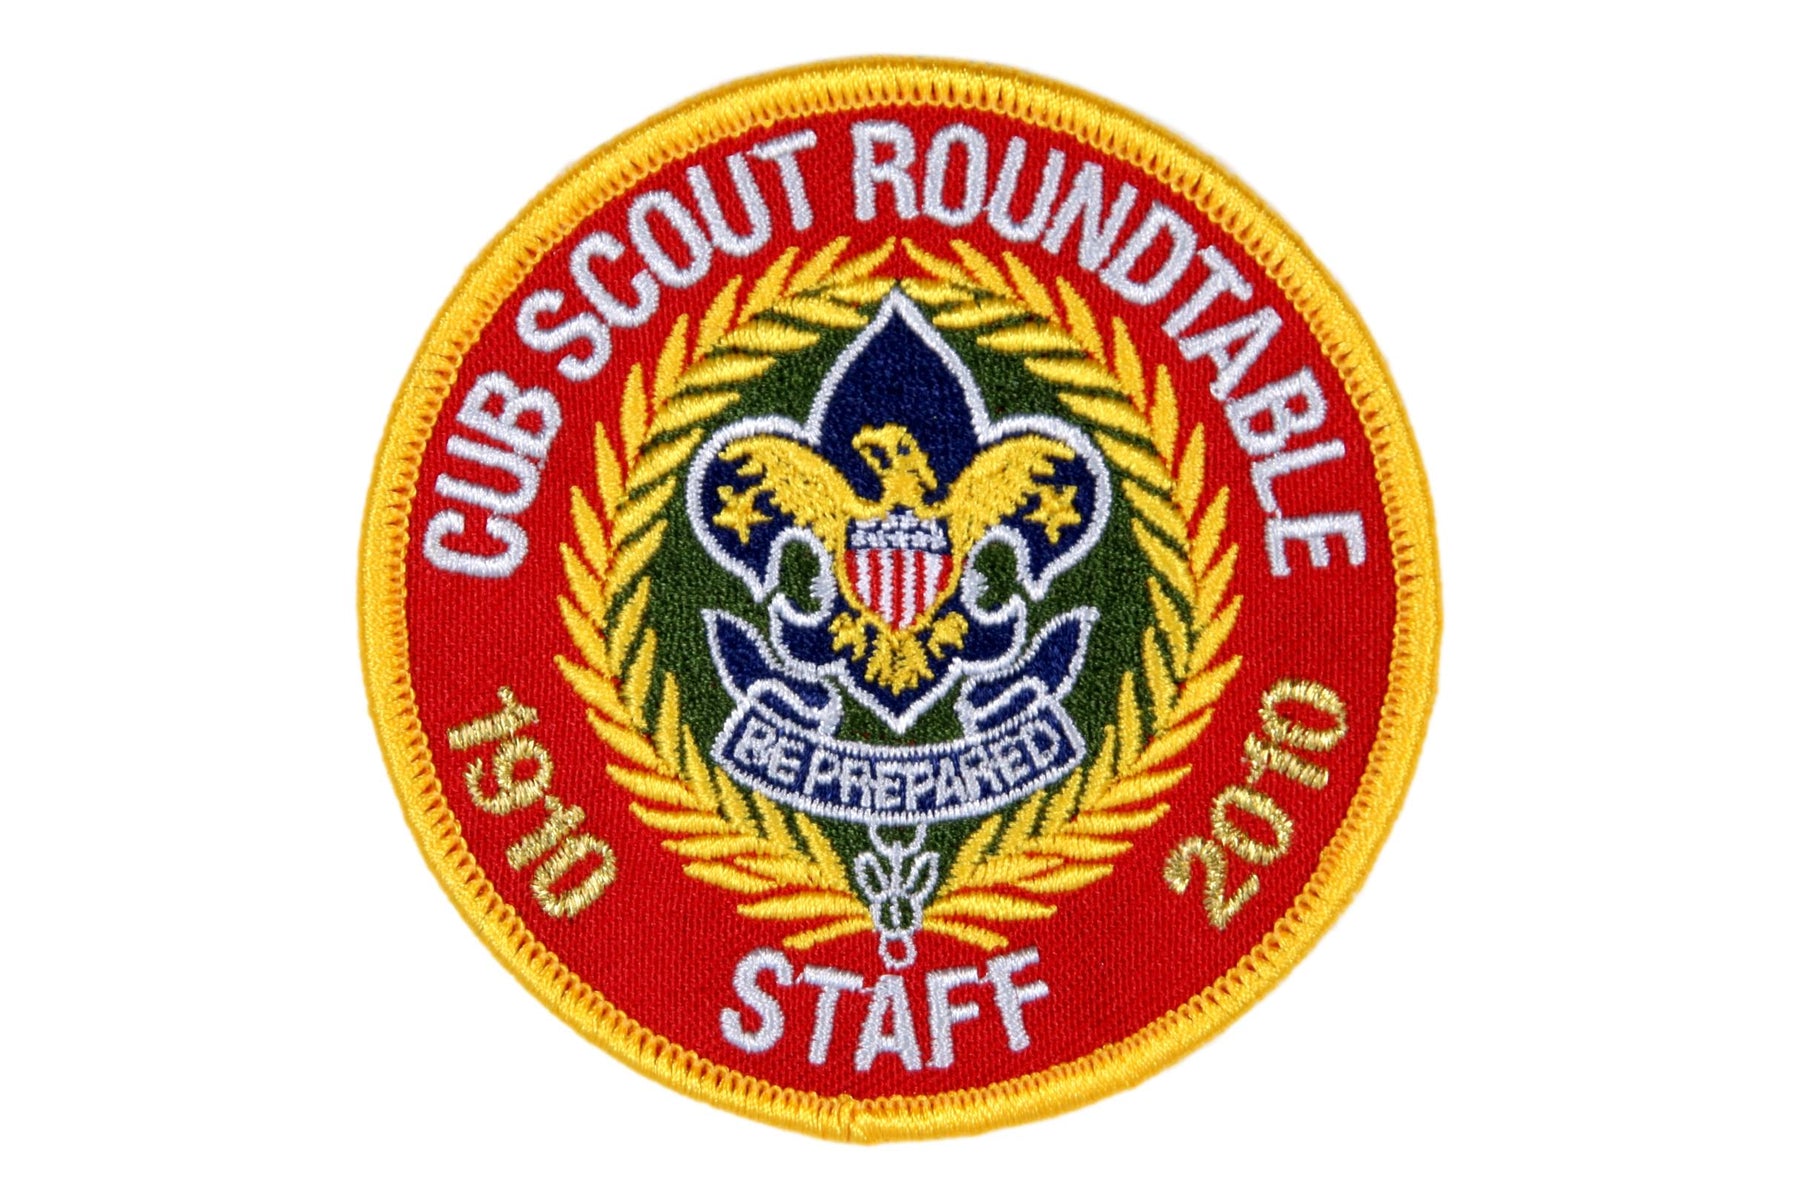 Cub Scout Roundtable Staff Patch 2010